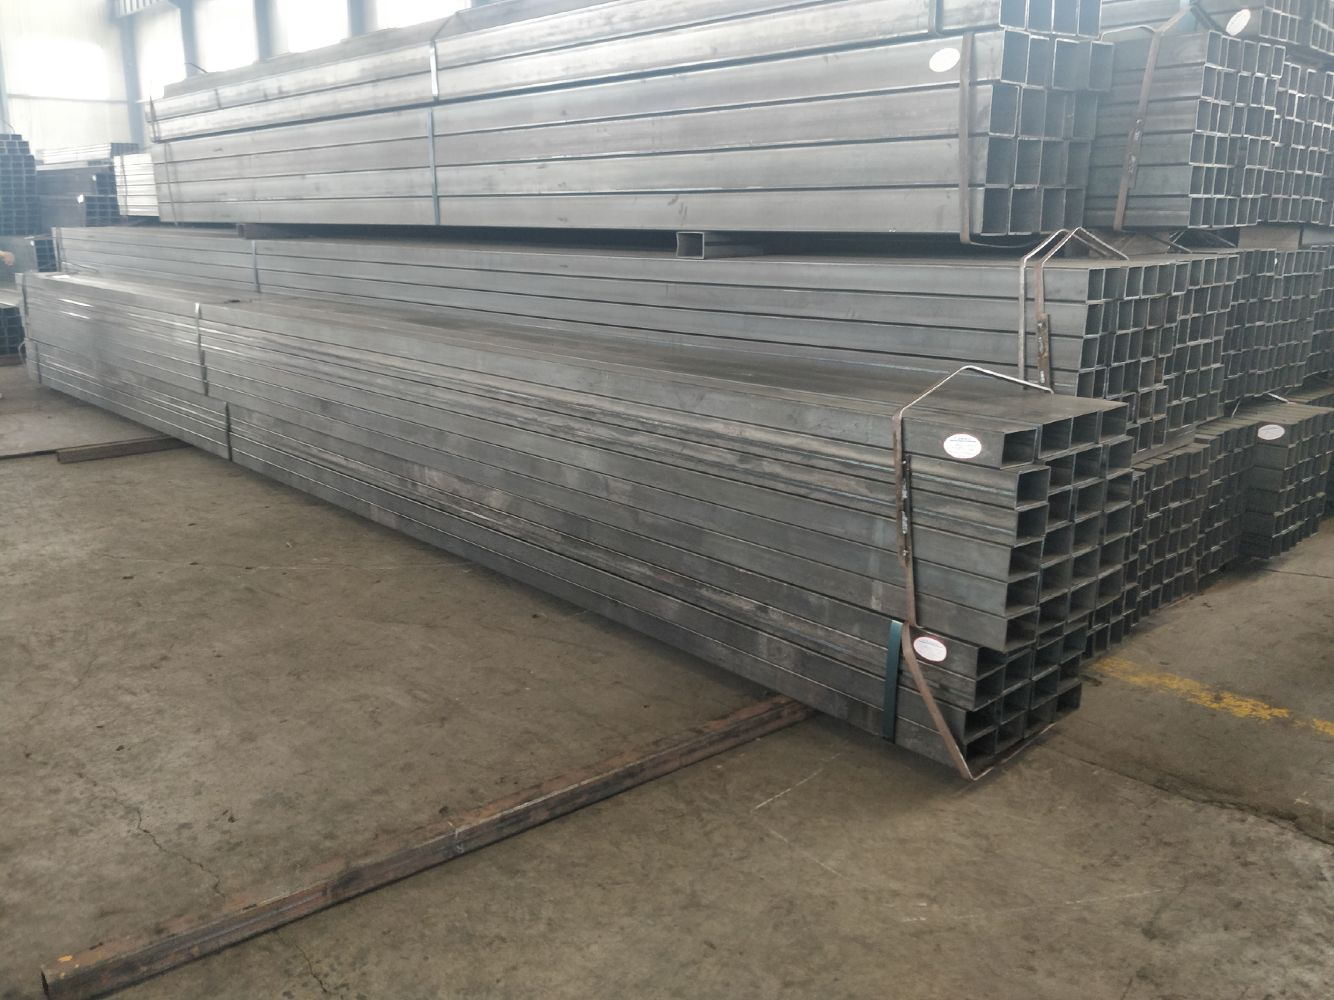 About Rectangular Steel Pipes